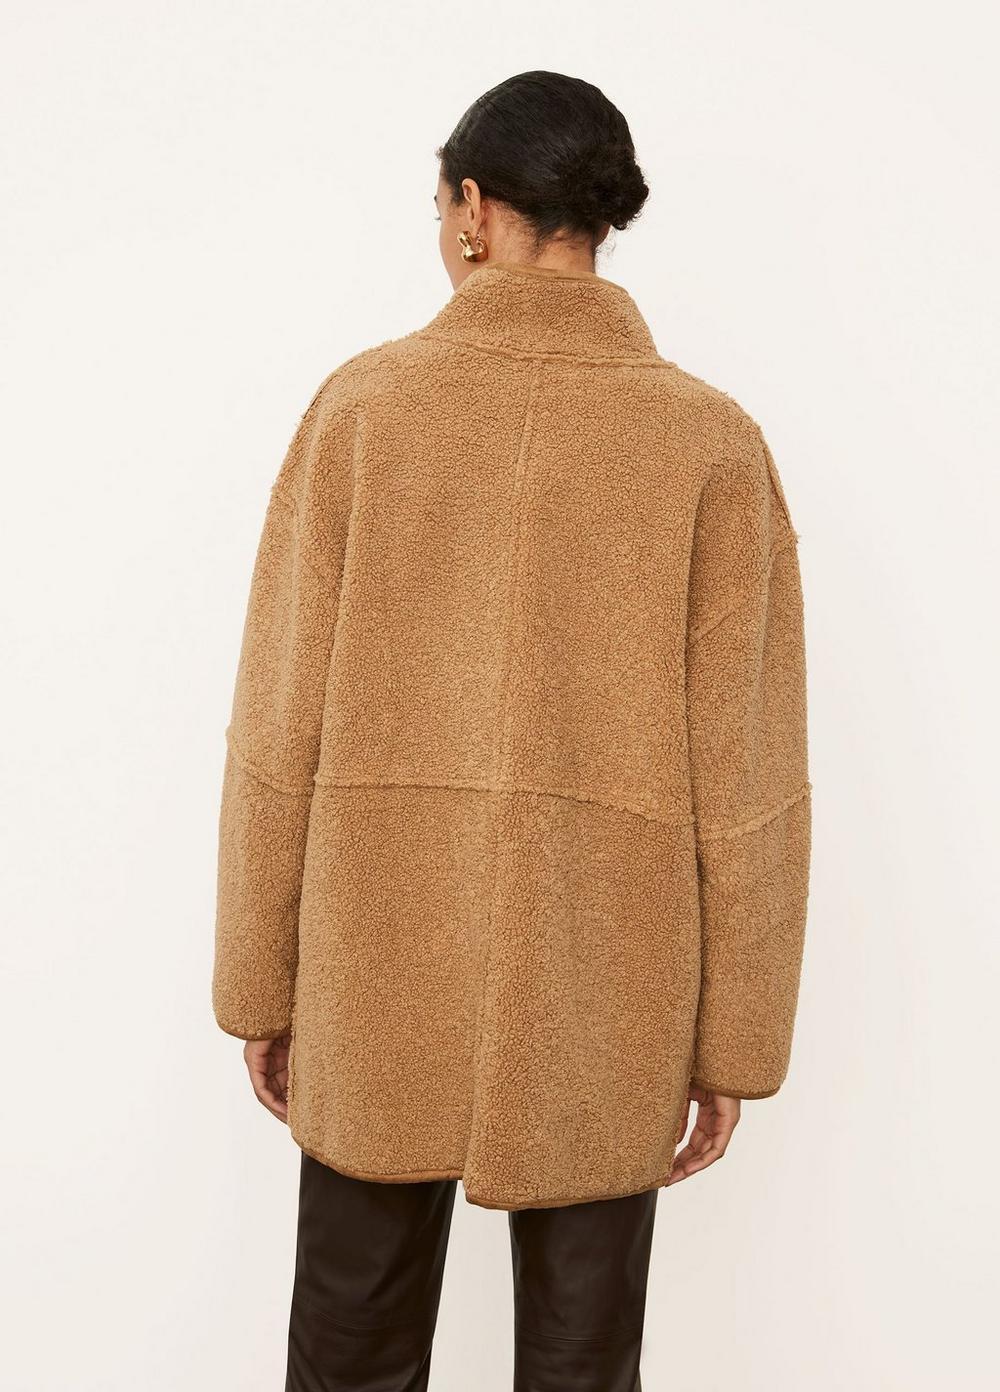 Vince Oversized Sherpa Jacket in Natural | Lyst